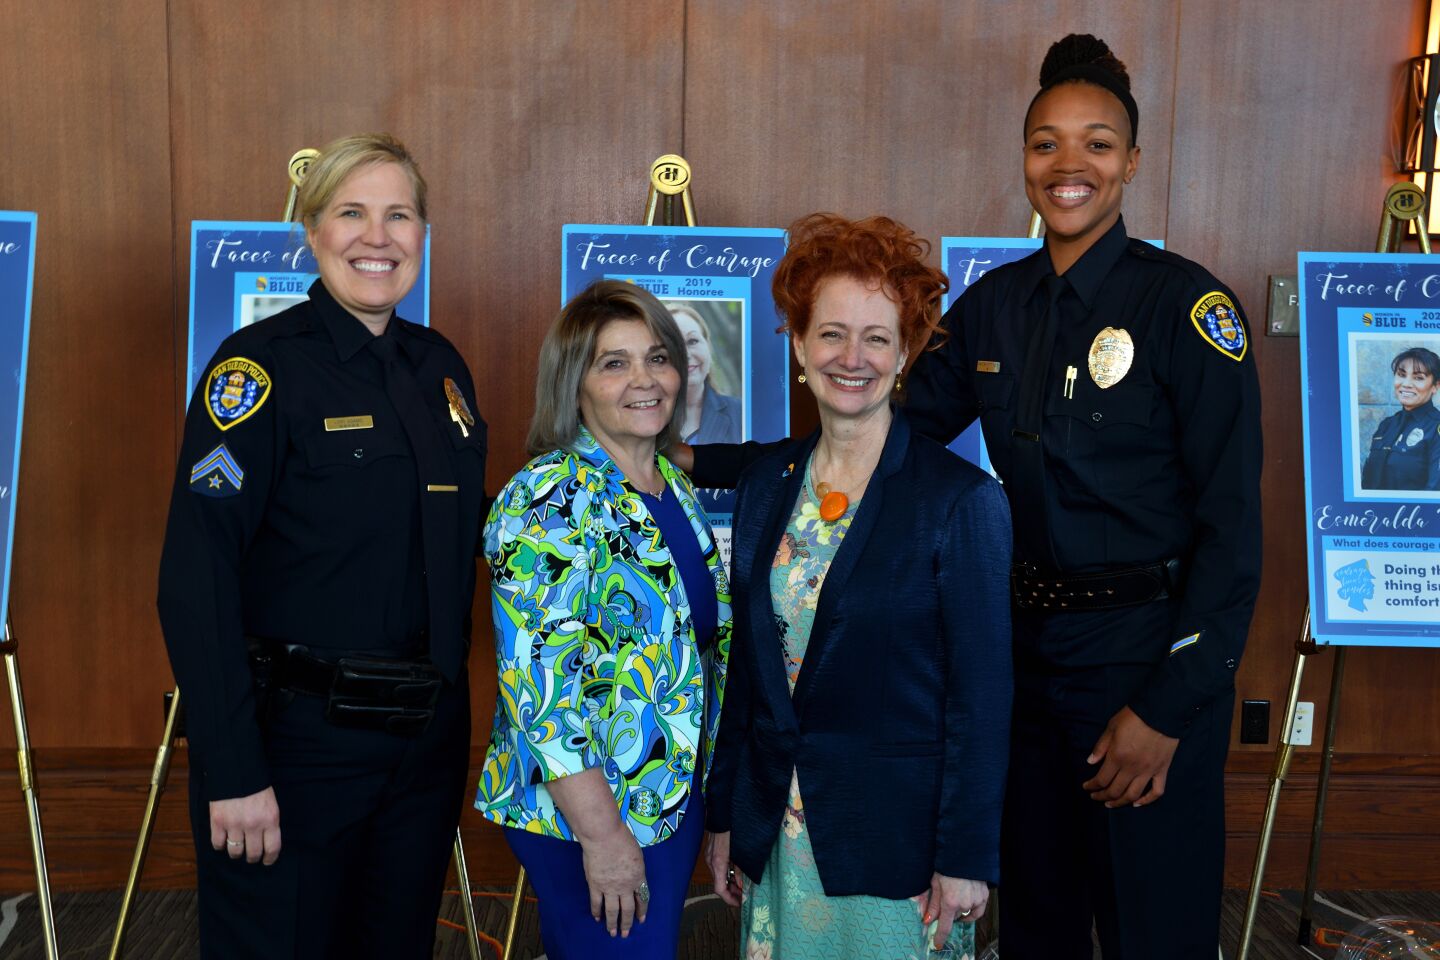 San Diego Police Department honorees Senior Detective Lori Adams, records administrator Silvia Satrom (from left) and Officer Kalena Tutt (right) stand with San Diego Police Foundation President and Chief Executive Sara Napoli at the "Women in Blue: Heart & Valor" luncheon.